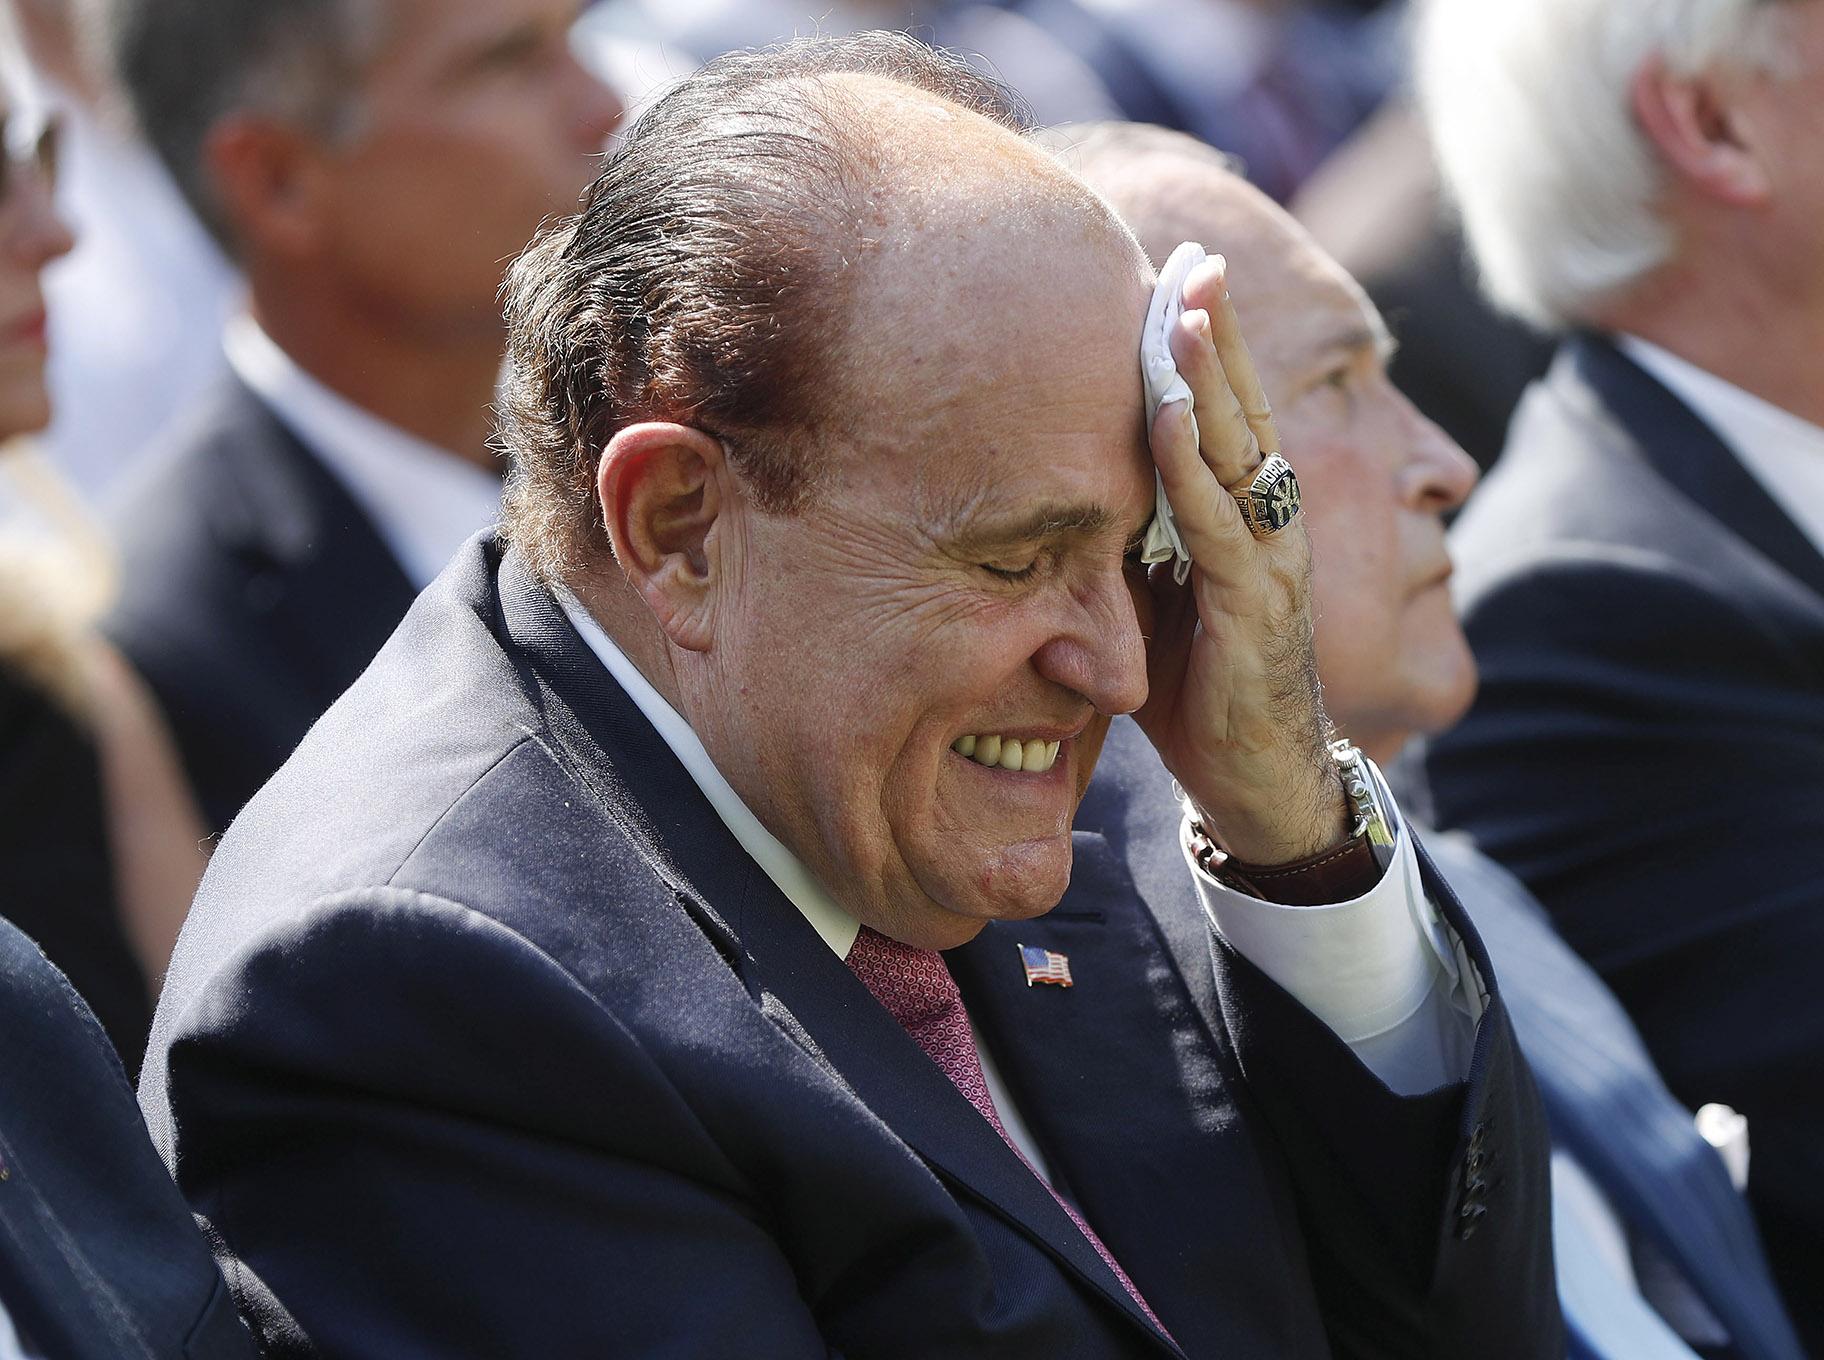 In this July 29, 2019 file photo, Rudy Giuliani, an attorney for President Donald Trump, wipes his forehead as he listens to Trump speak in the Rose Garden of the White House in Washington.  (AP Photo / Pablo Martinez Monsivais)